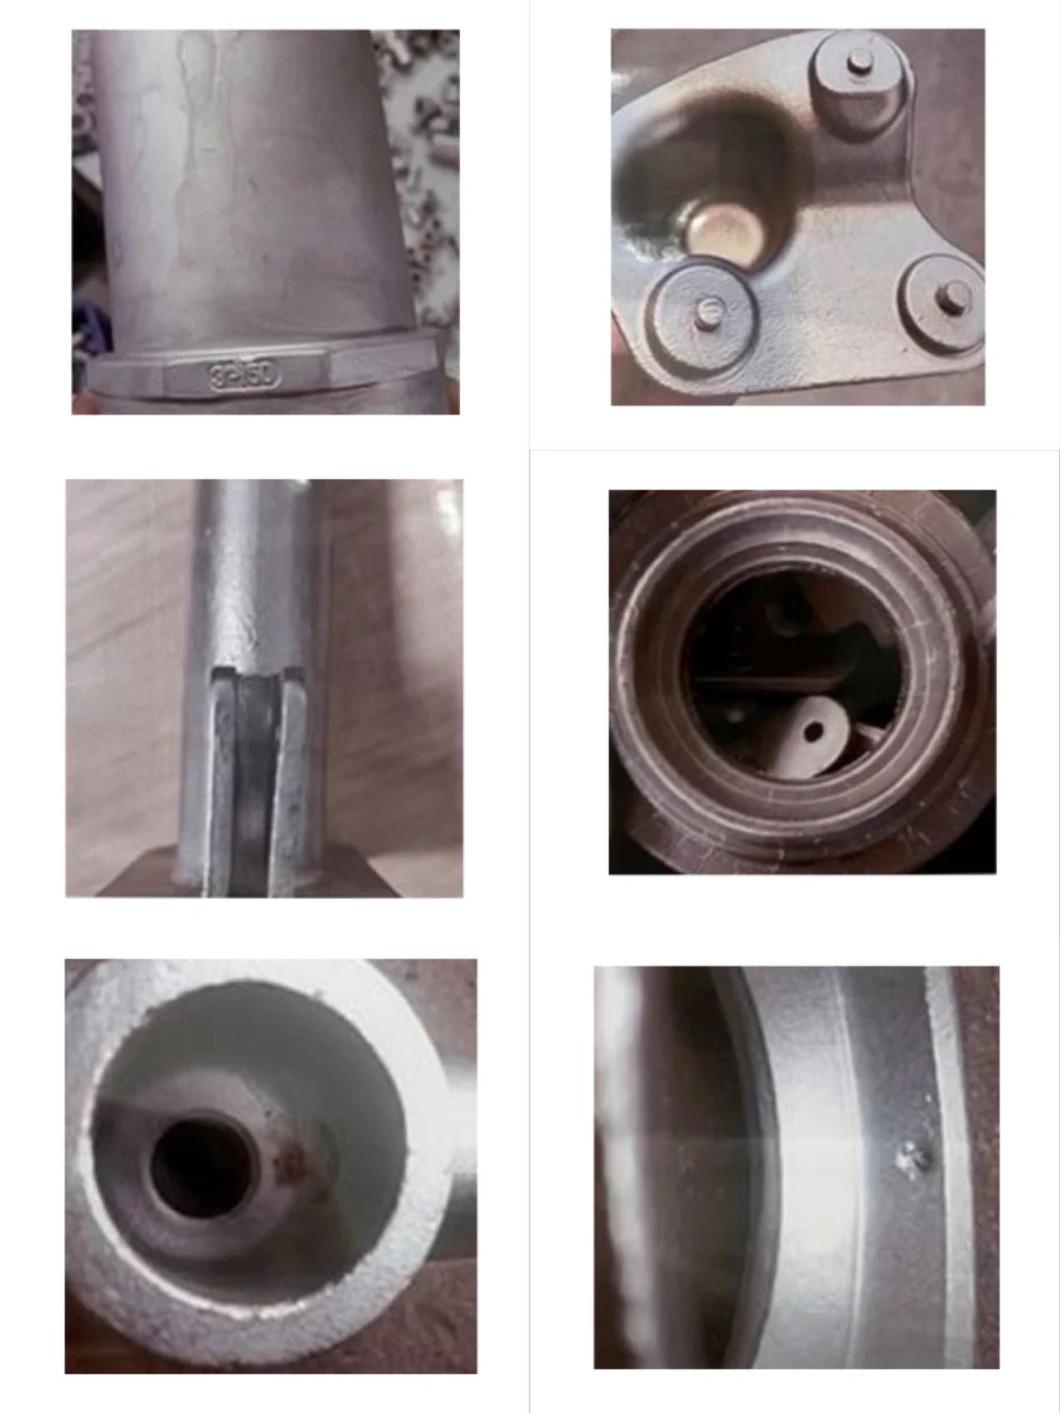 Customized Stainless Steel Pipe Fittings Lost Wax Casting Industrial/Machinery Pump Shell Parts